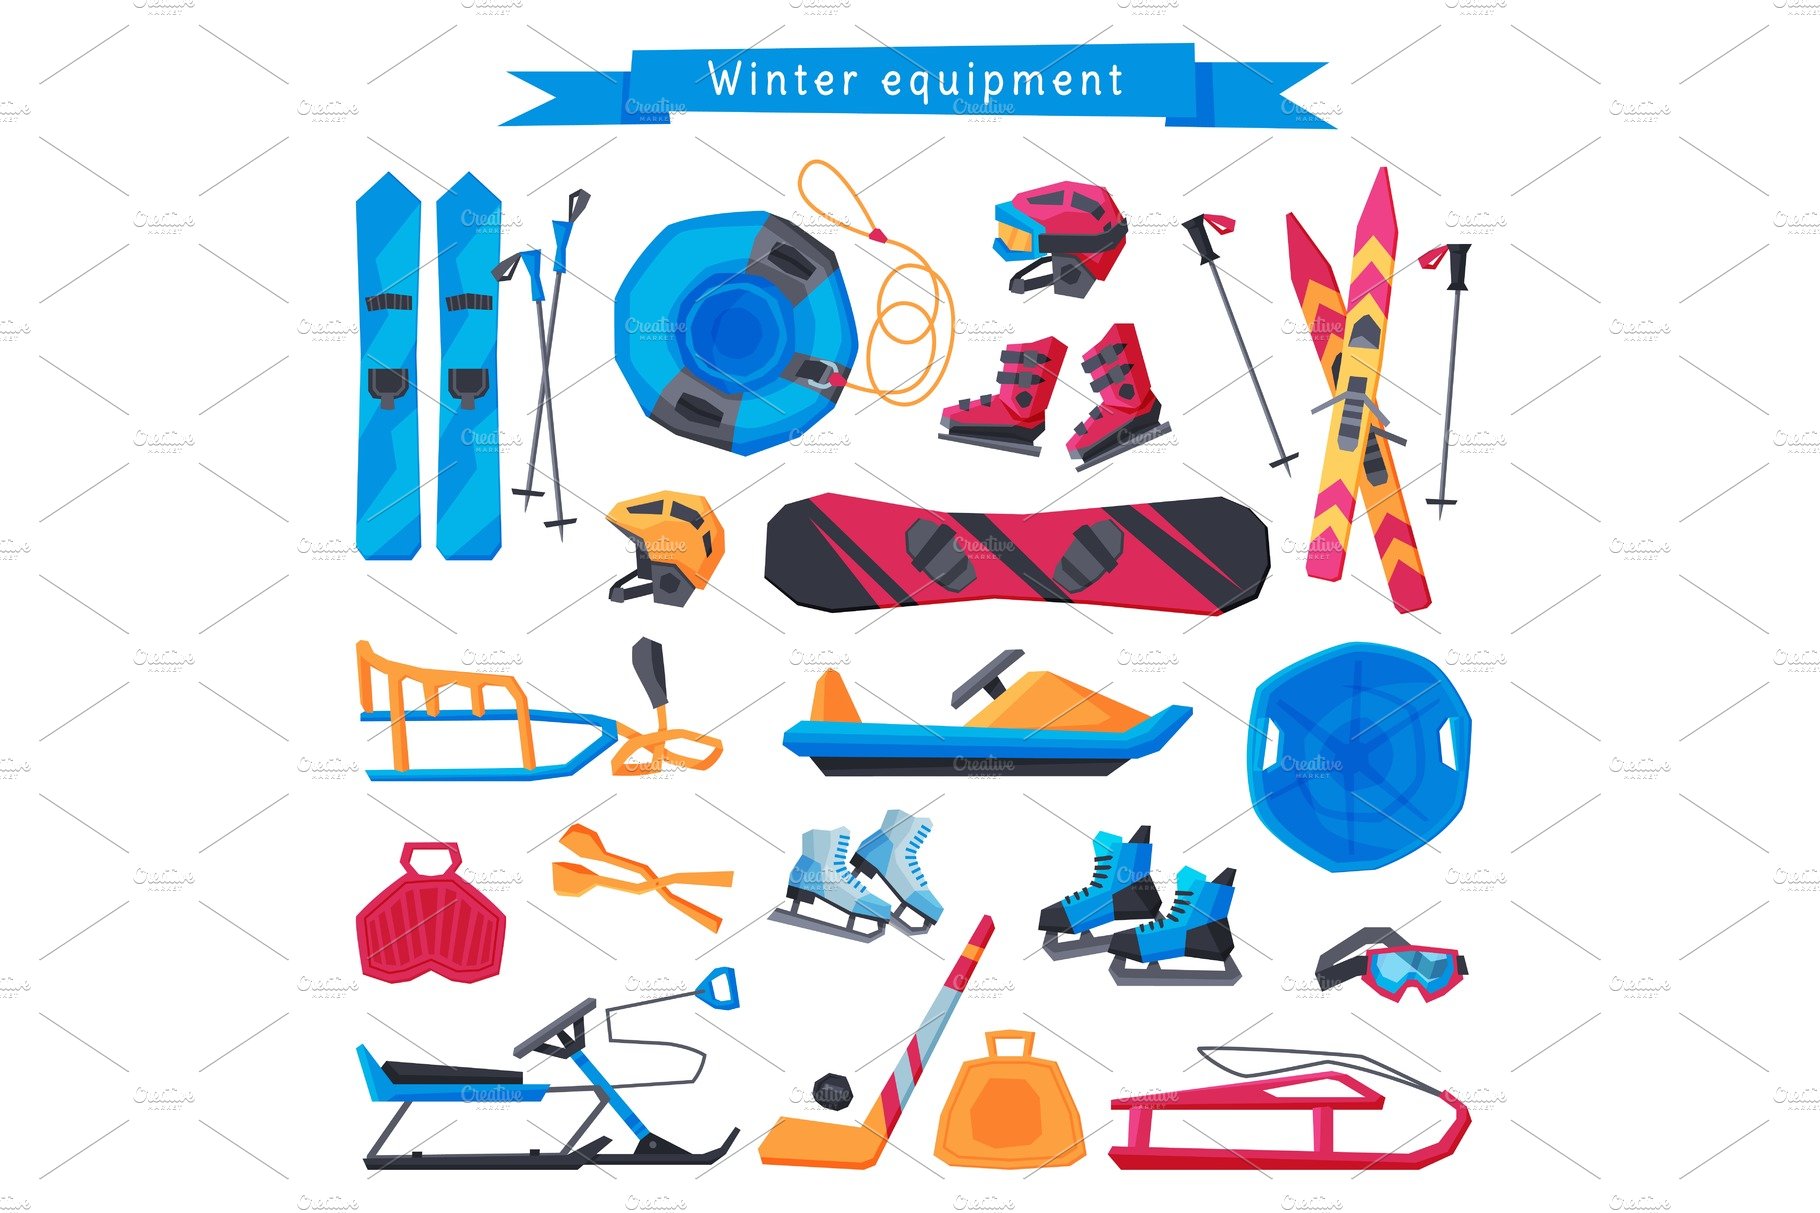 Winter Outdoor Sports and Leisure cover image.